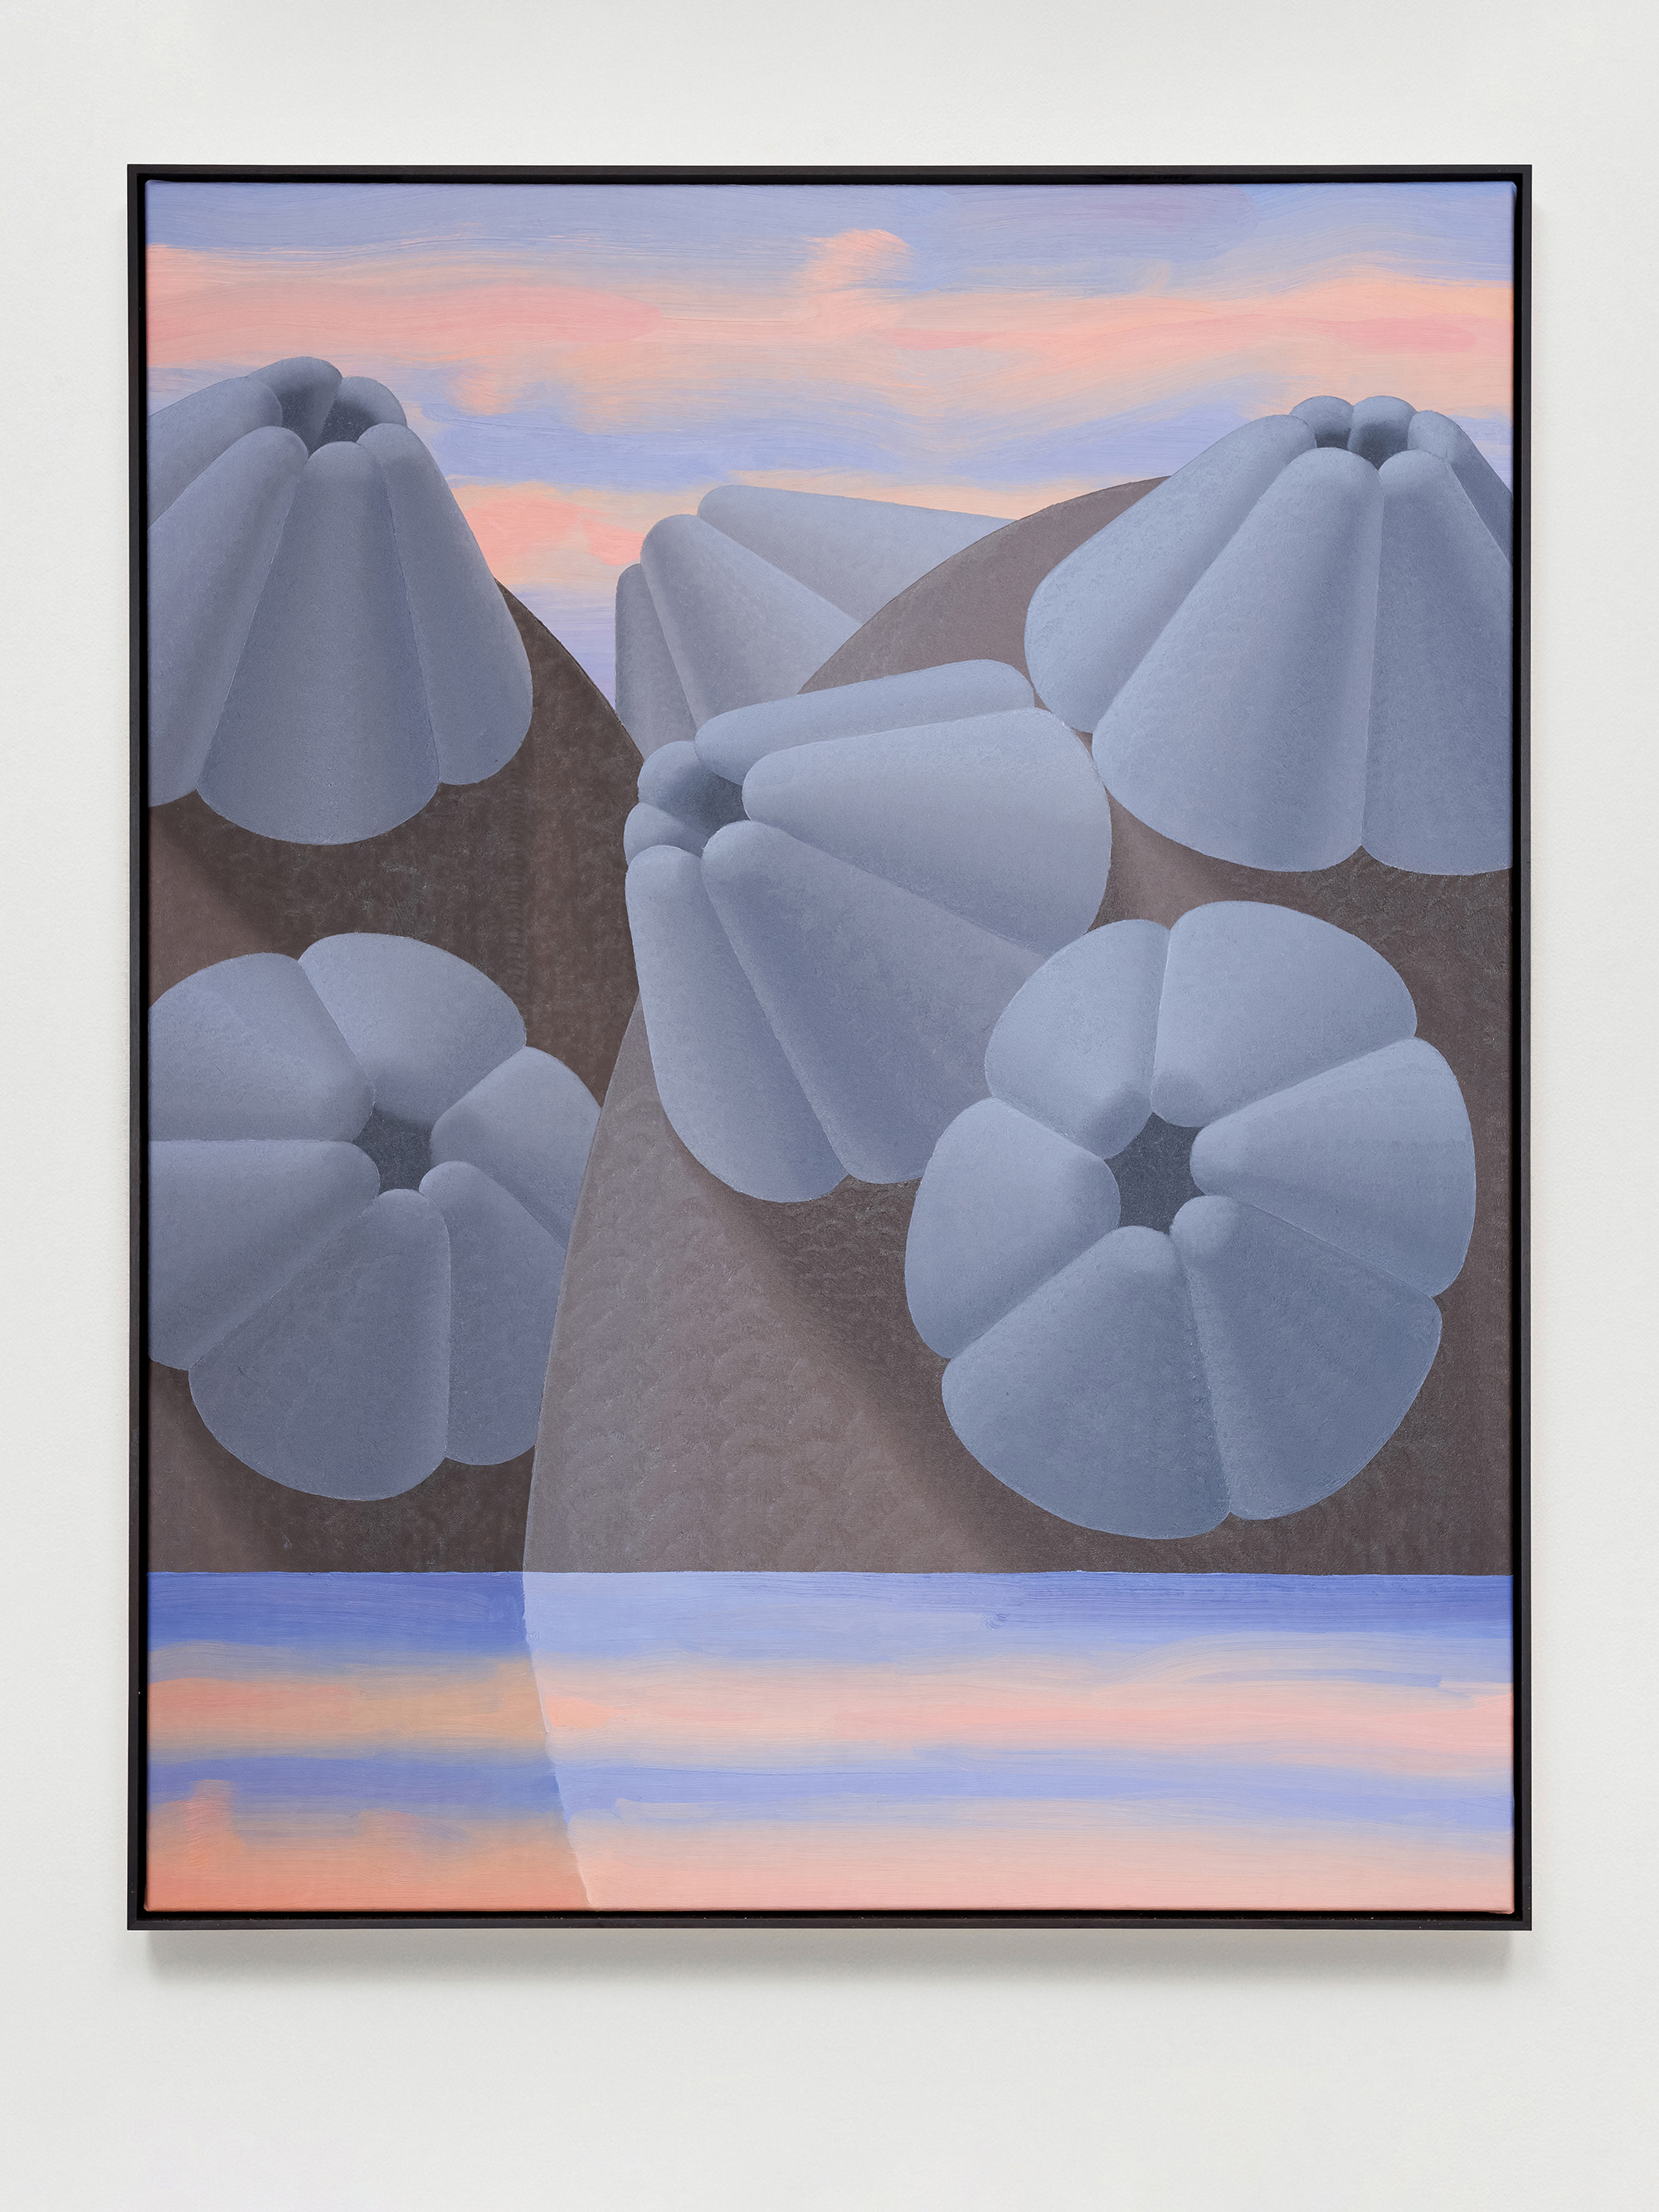 Laurens Legiers, Barnacles at Sunset, 2022, Oil on canvas, 120 x 95 cm, 47 1/4 x 37 3/8 in.